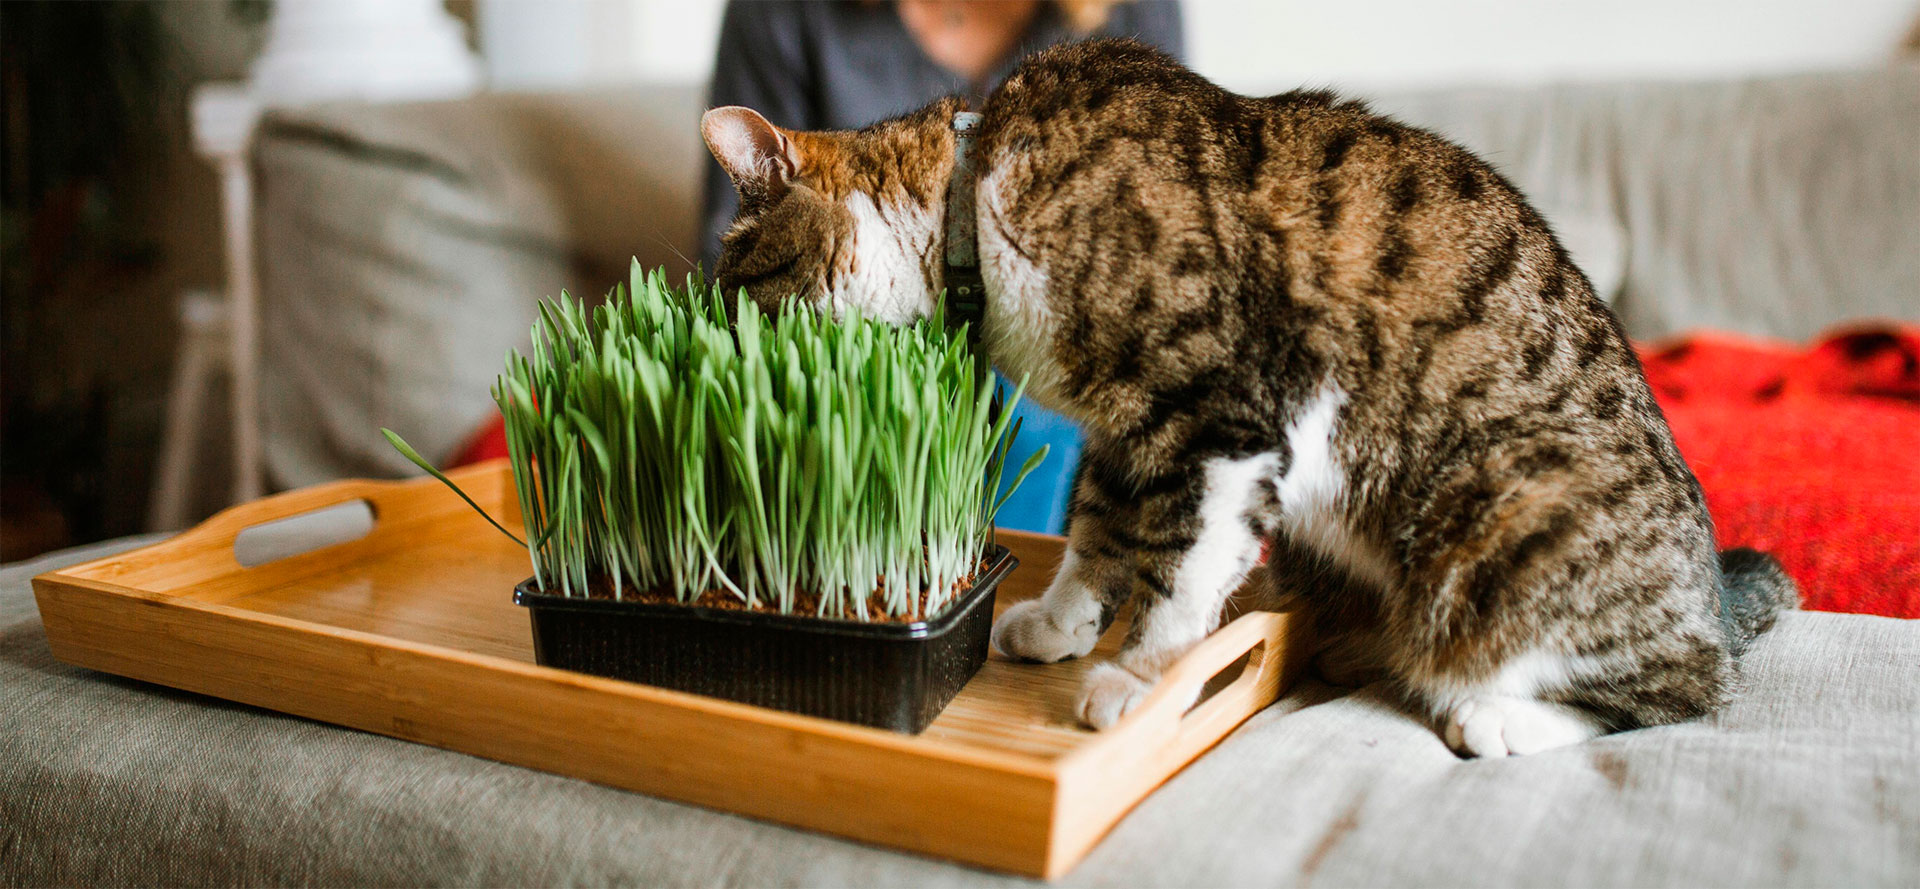 Grass for Cat.